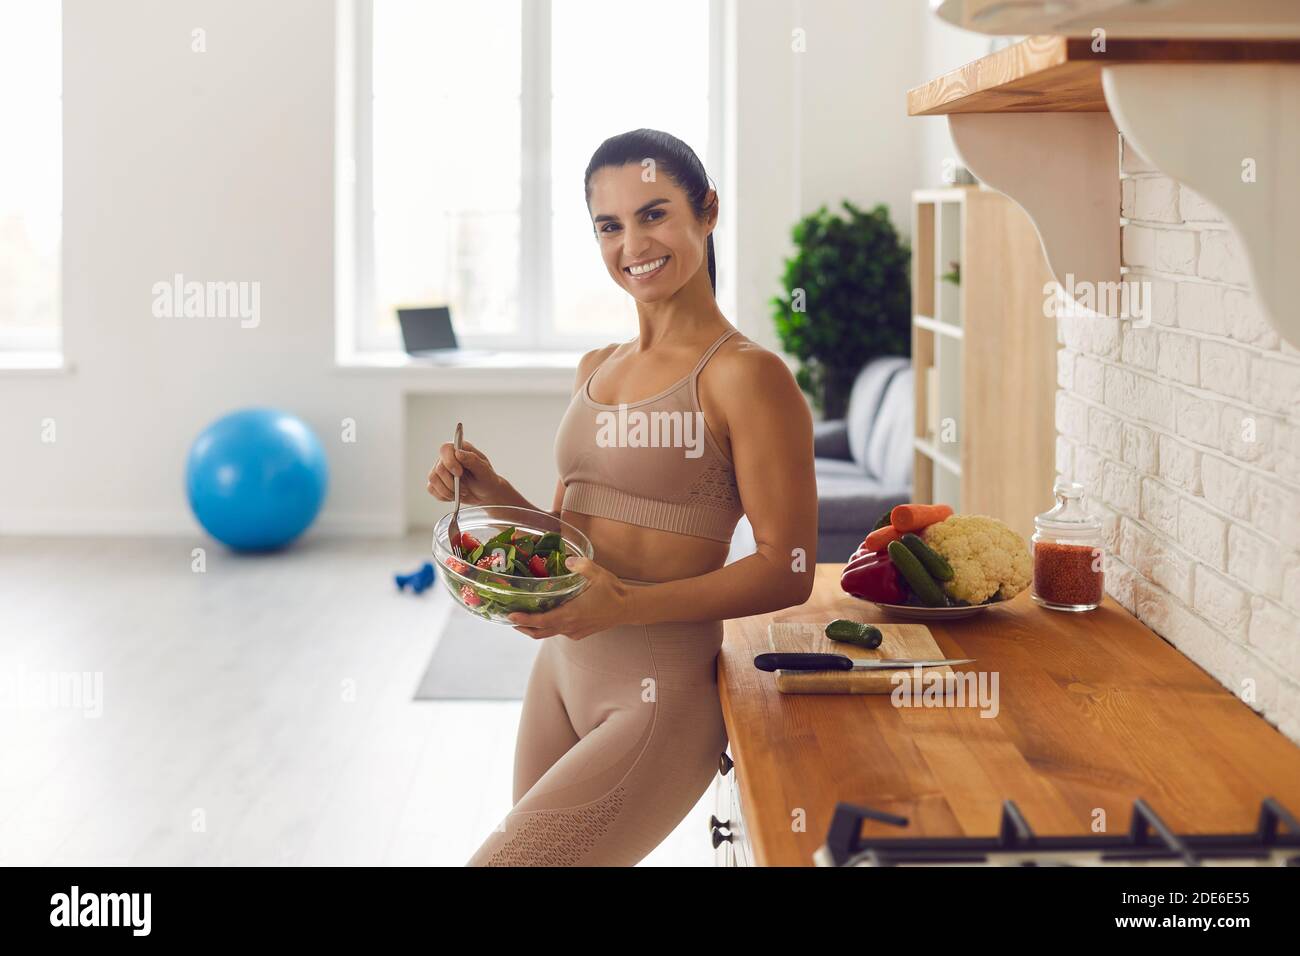 Happy athletic woman eating healthy vegetable salad after fitness workout at home Stock Photo